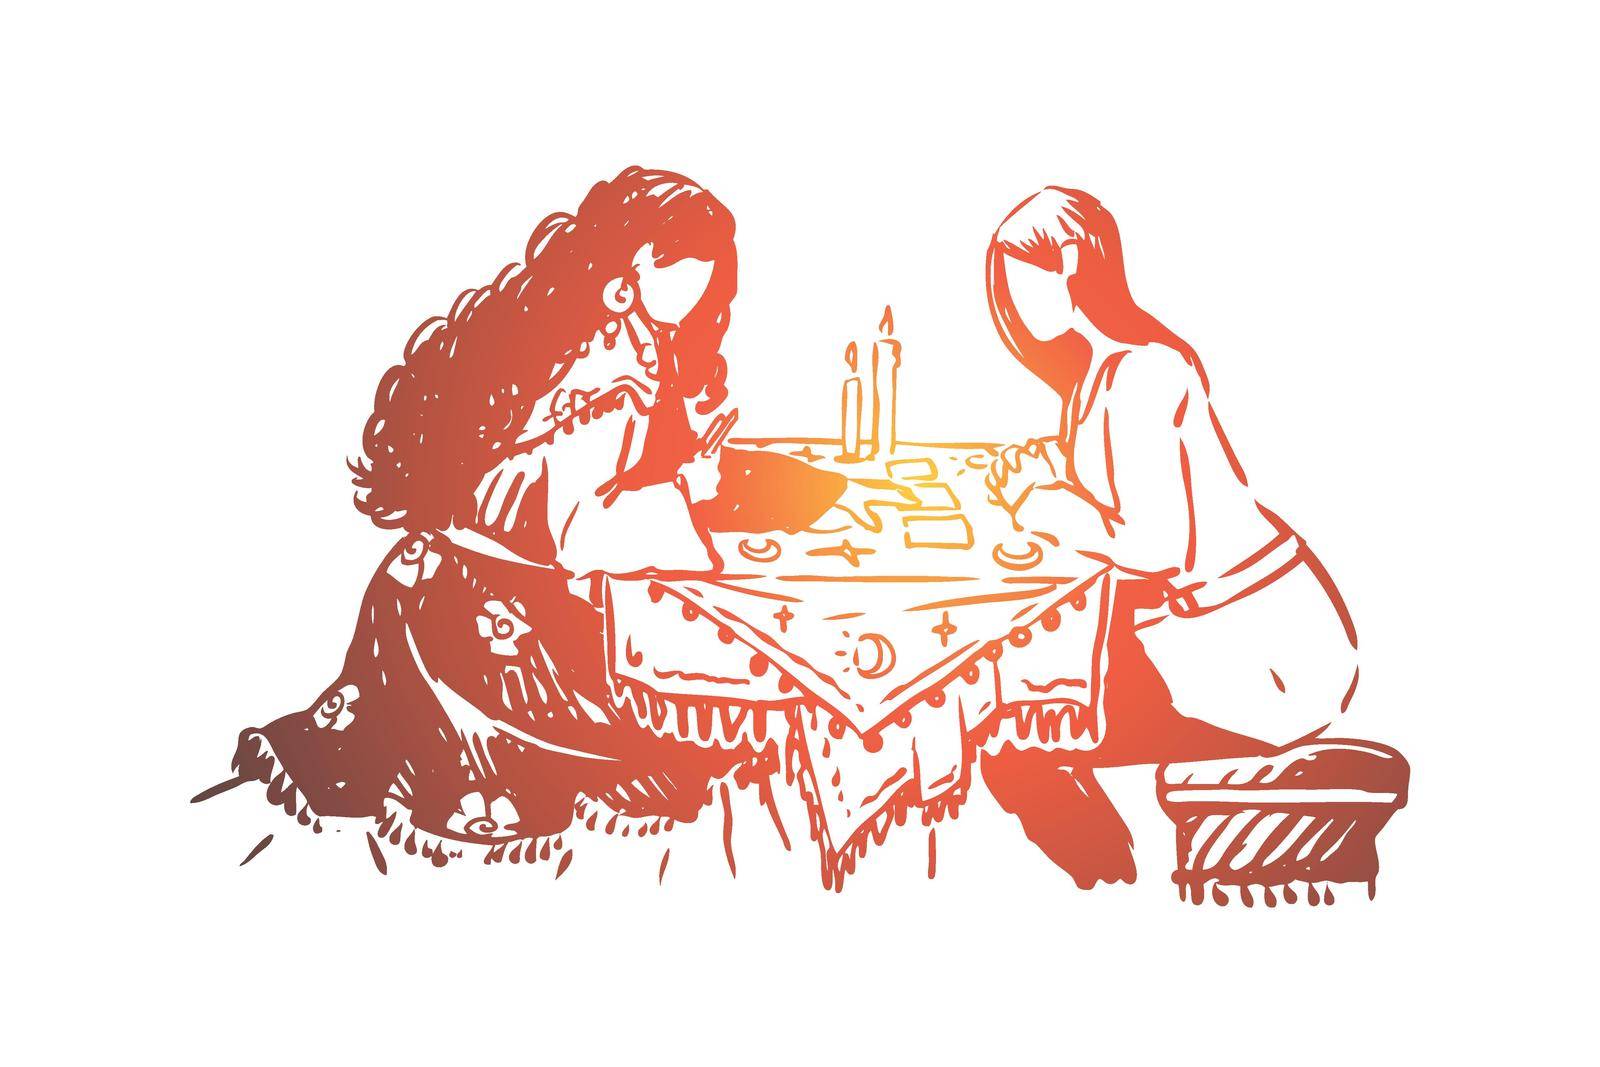 Gipsy woman, fortune teller and client, fate prediction, future forecast, visit to soothsayer. Fortune telling session, divination on tarot cards concept sketch. Hand drawn vector illustration